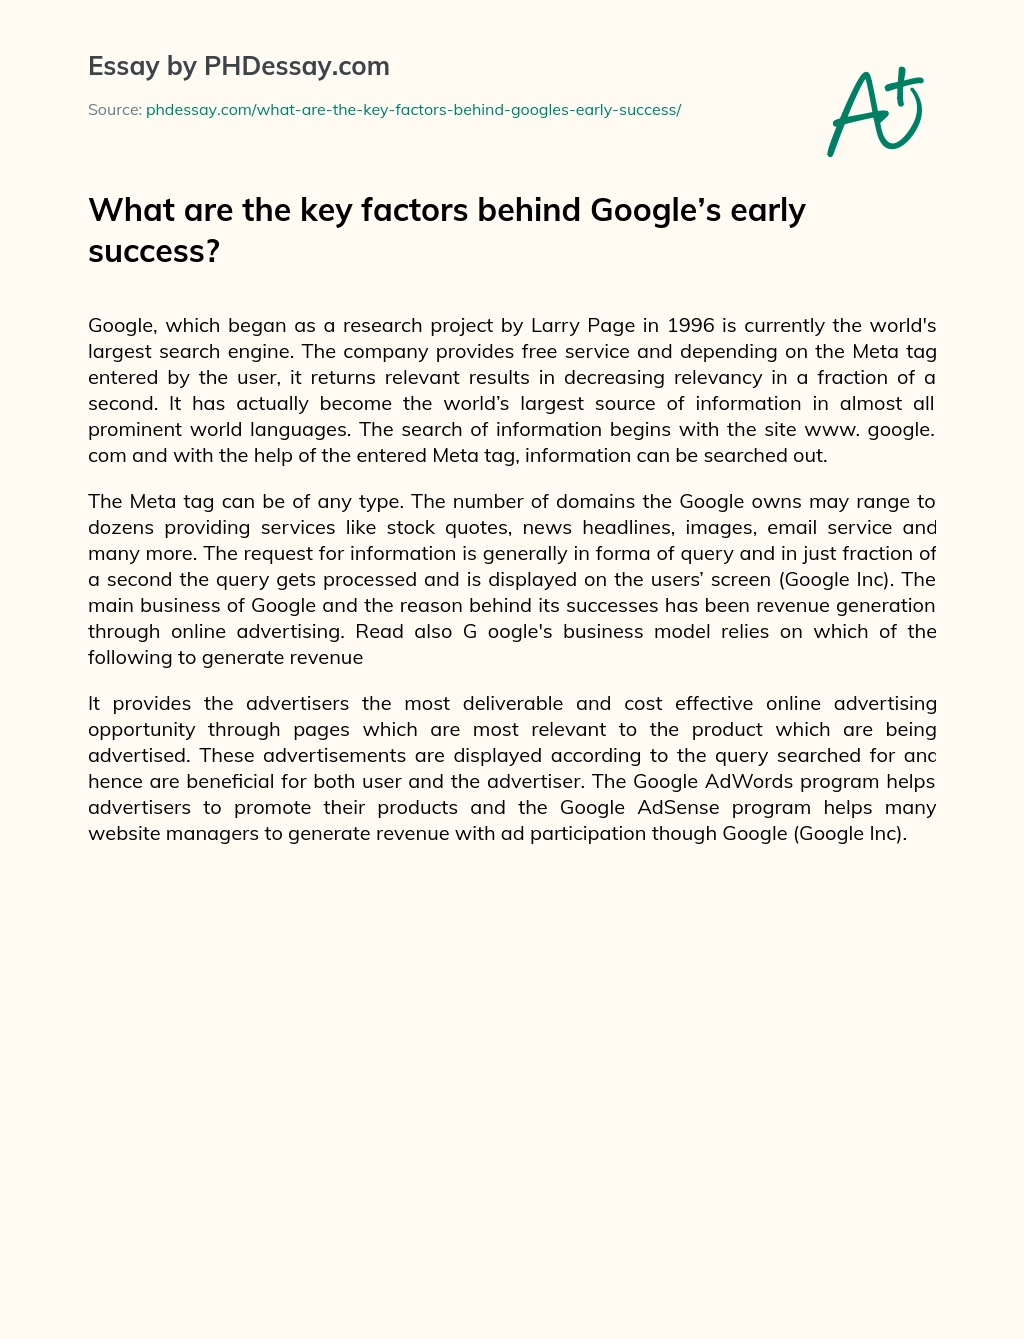 What are the key factors behind Google’s early success? essay